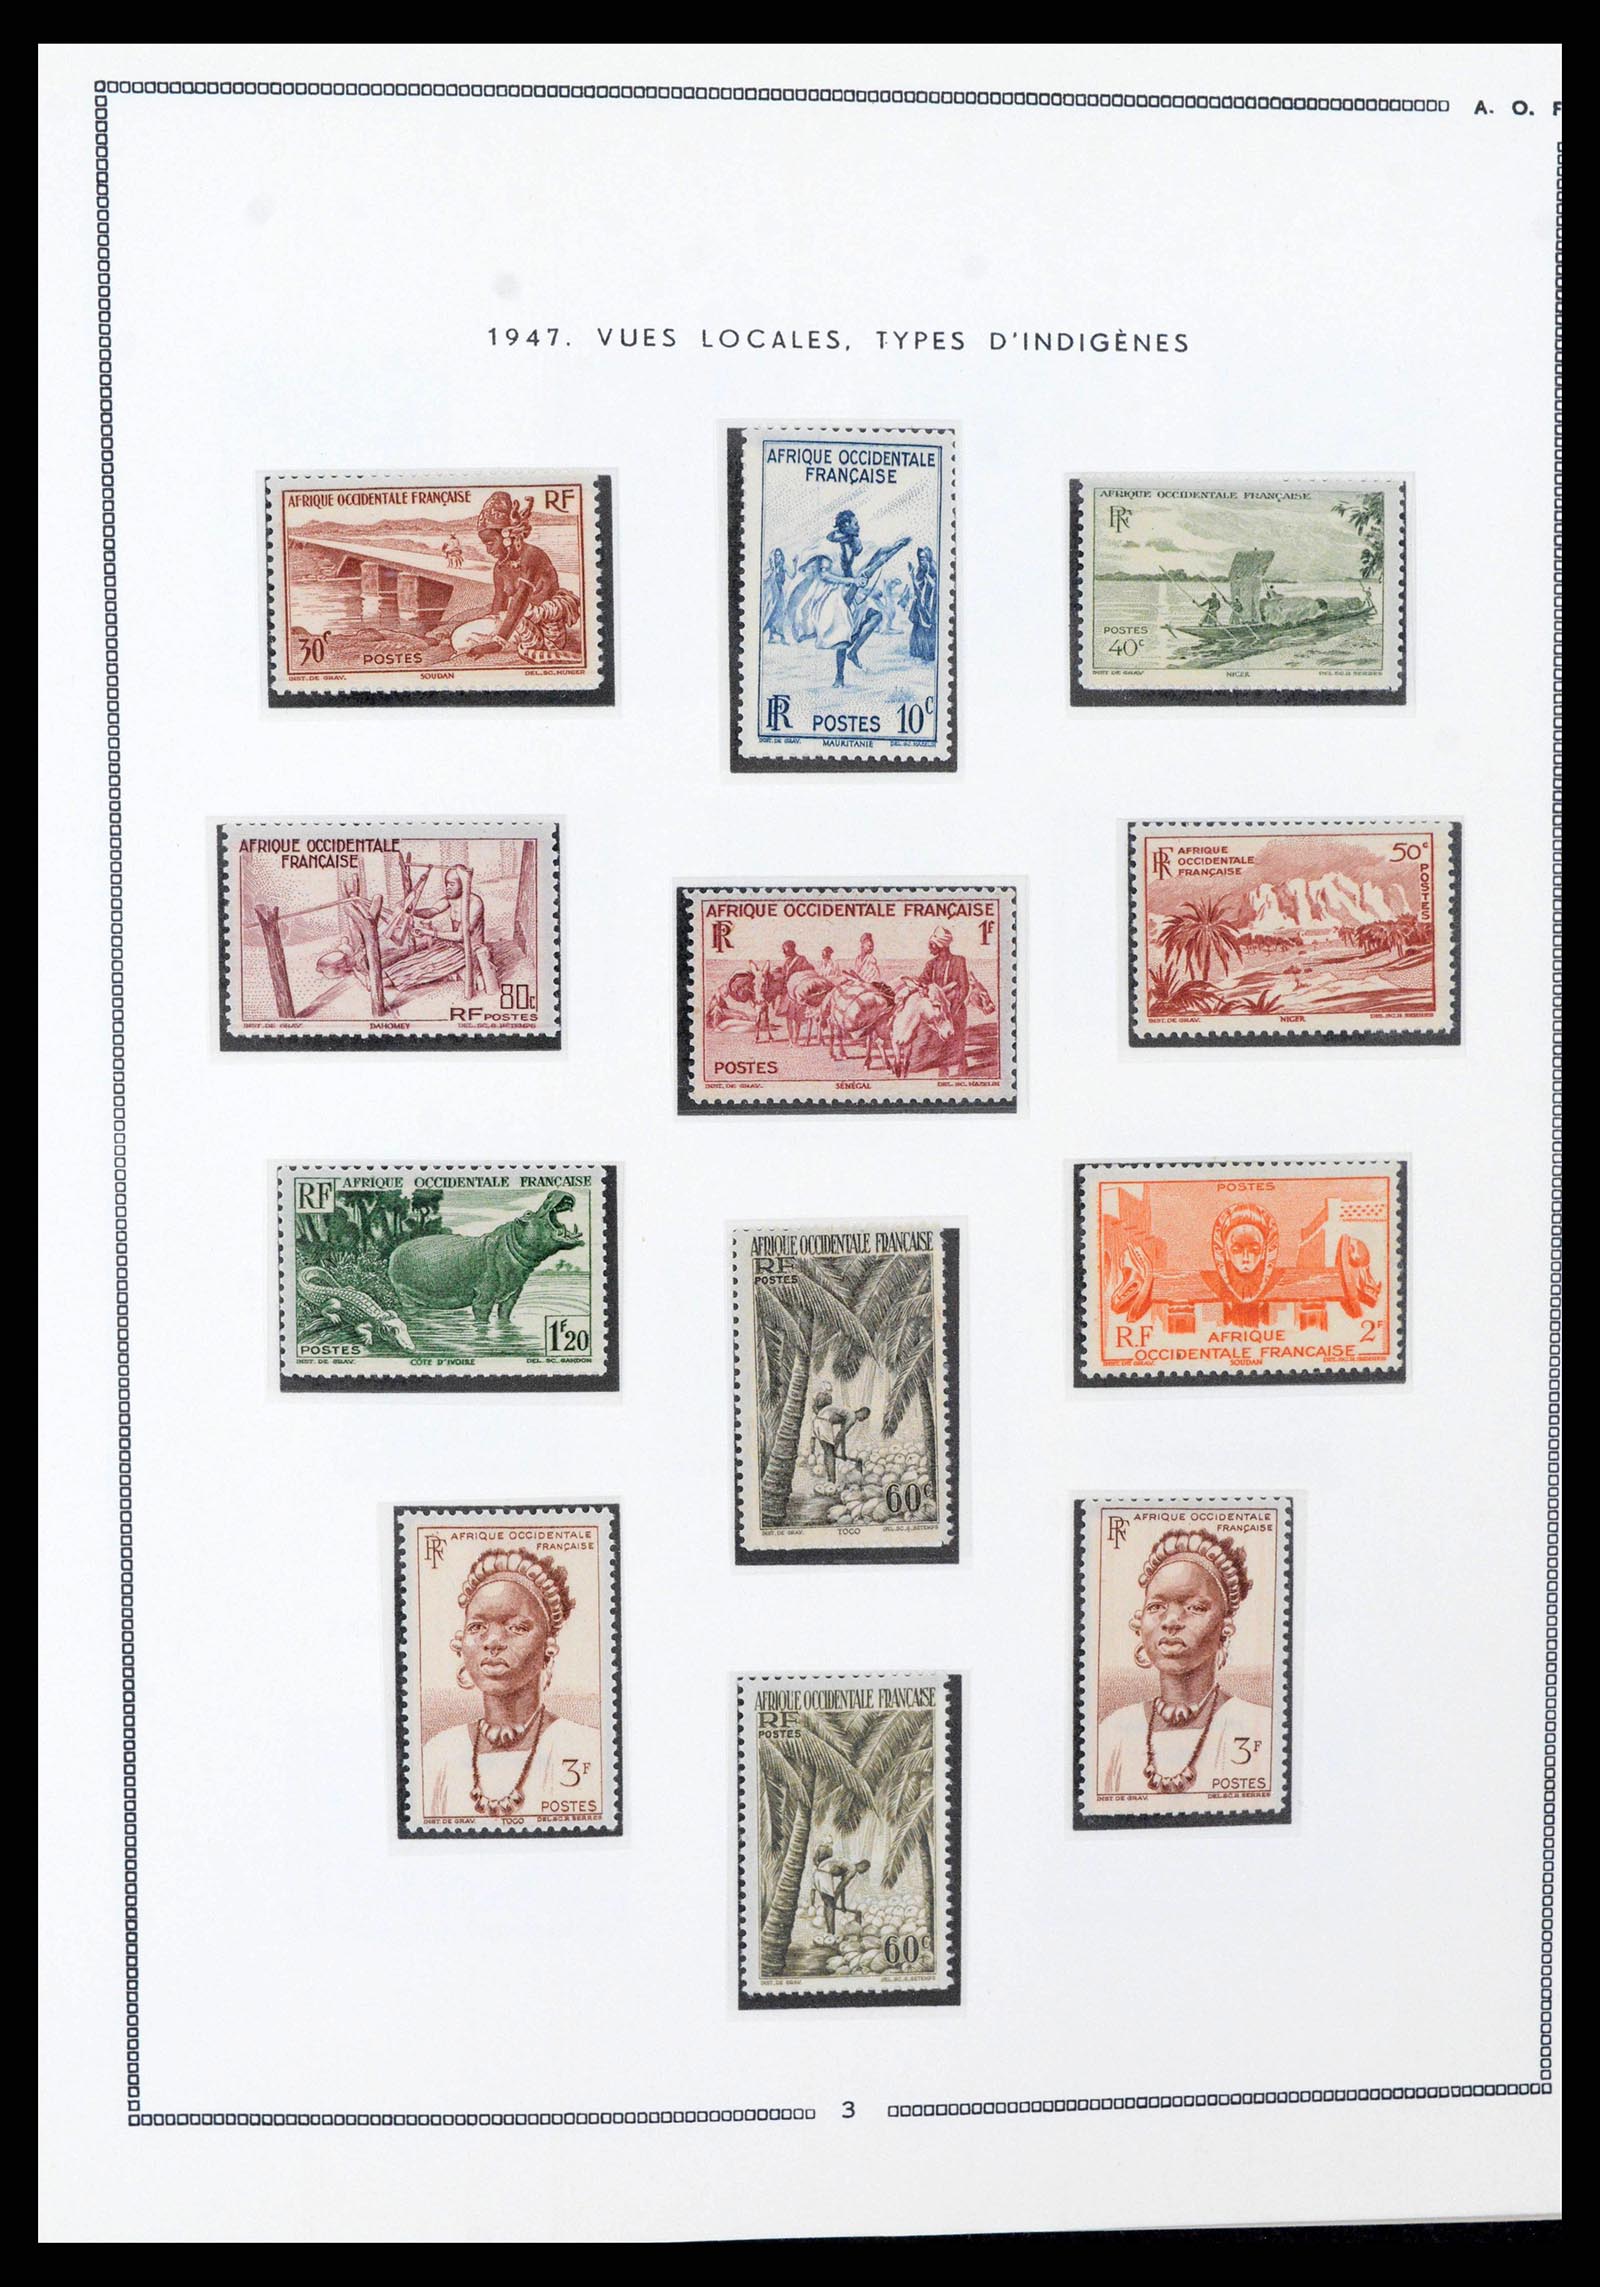 38385 0020 - Stamp collection 38385 French Colonies supercollection 1859-1975.